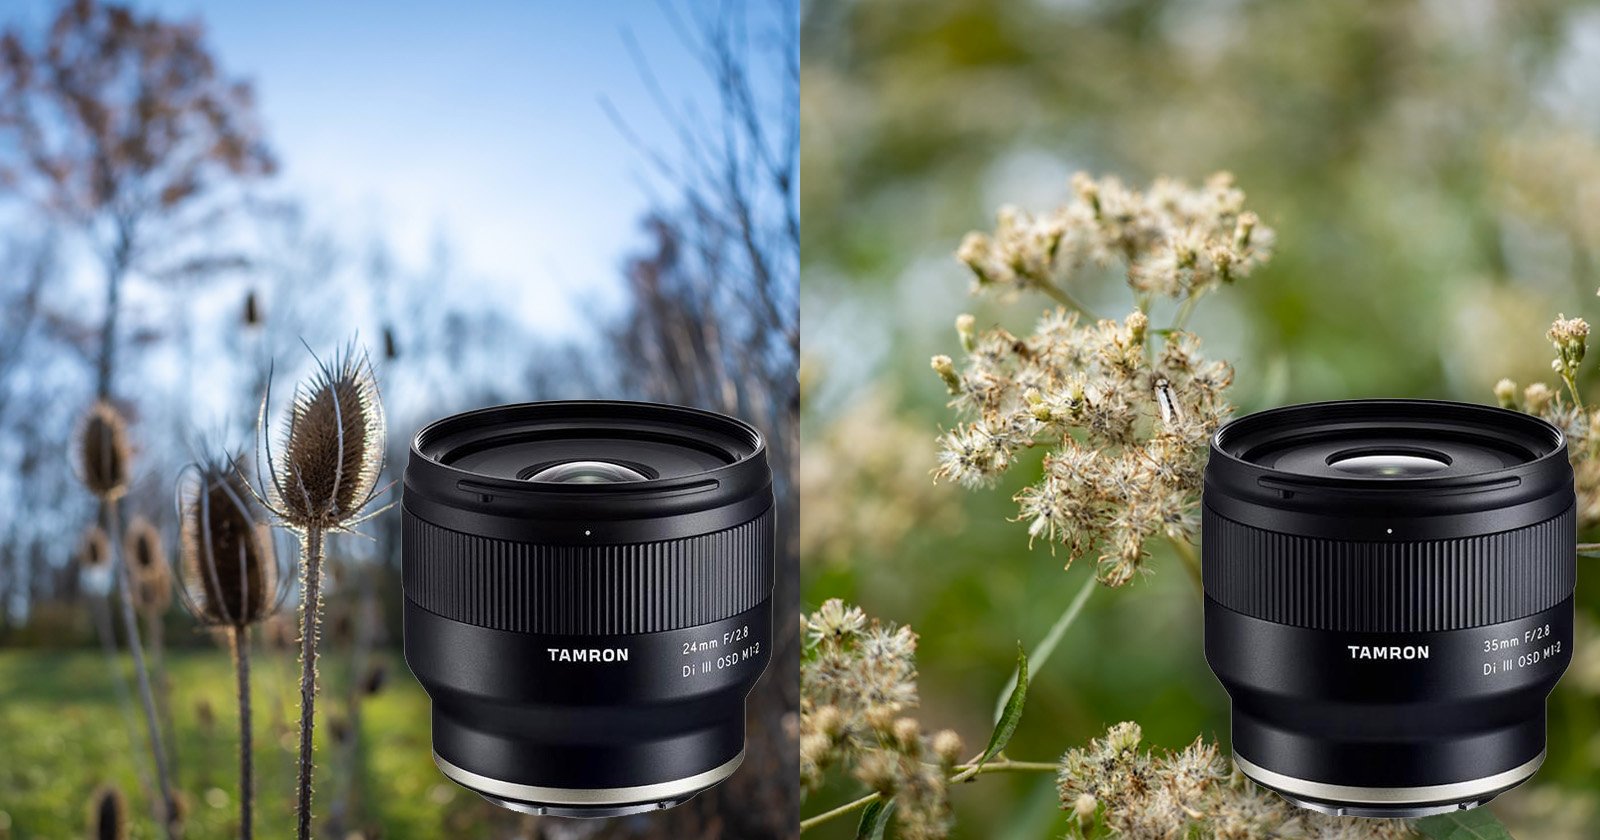 Tamron 24mm f/2.8 and 35mm f/2.8 Review: Compact & Affordable Primes for Sony